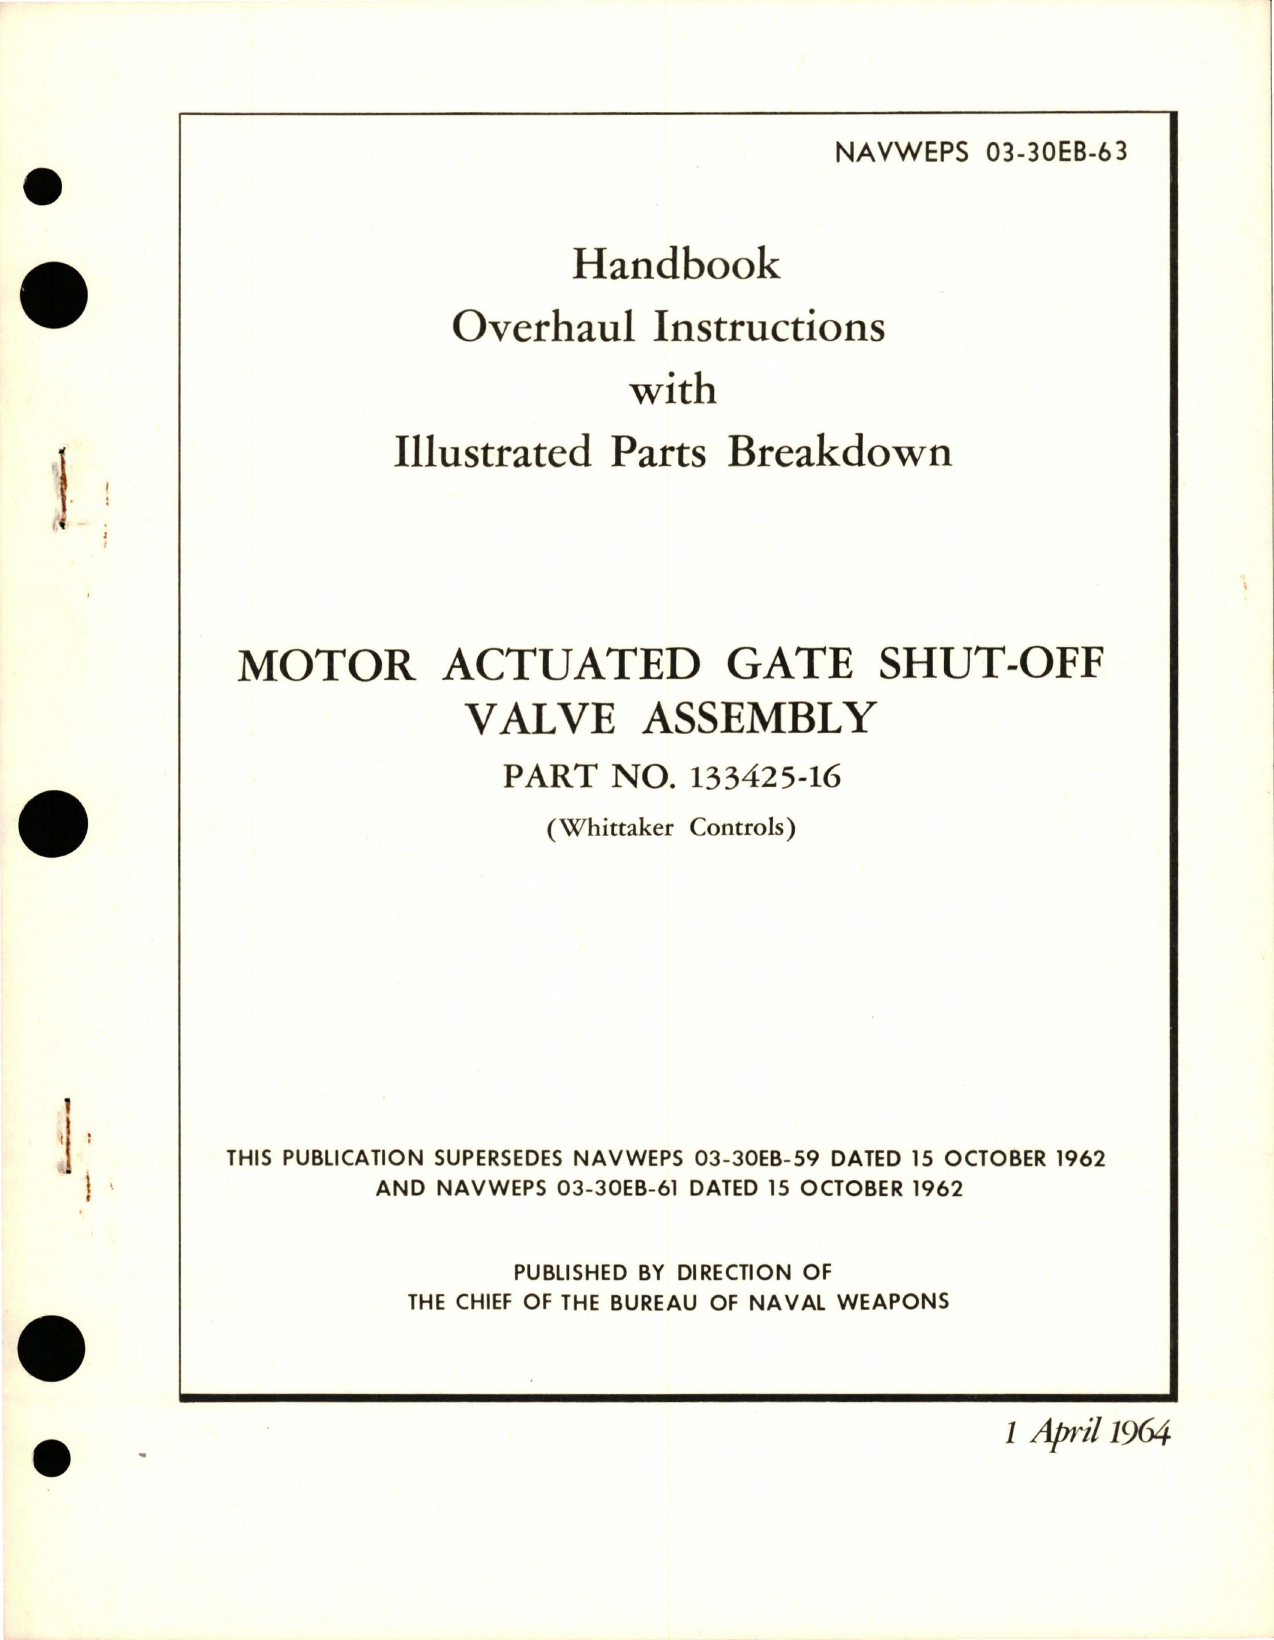 Sample page 1 from AirCorps Library document: Overhaul Instructions with Illustrated Parts for Motor Actuated Gate Shut-Off Valve Assembly - Part 133425-16